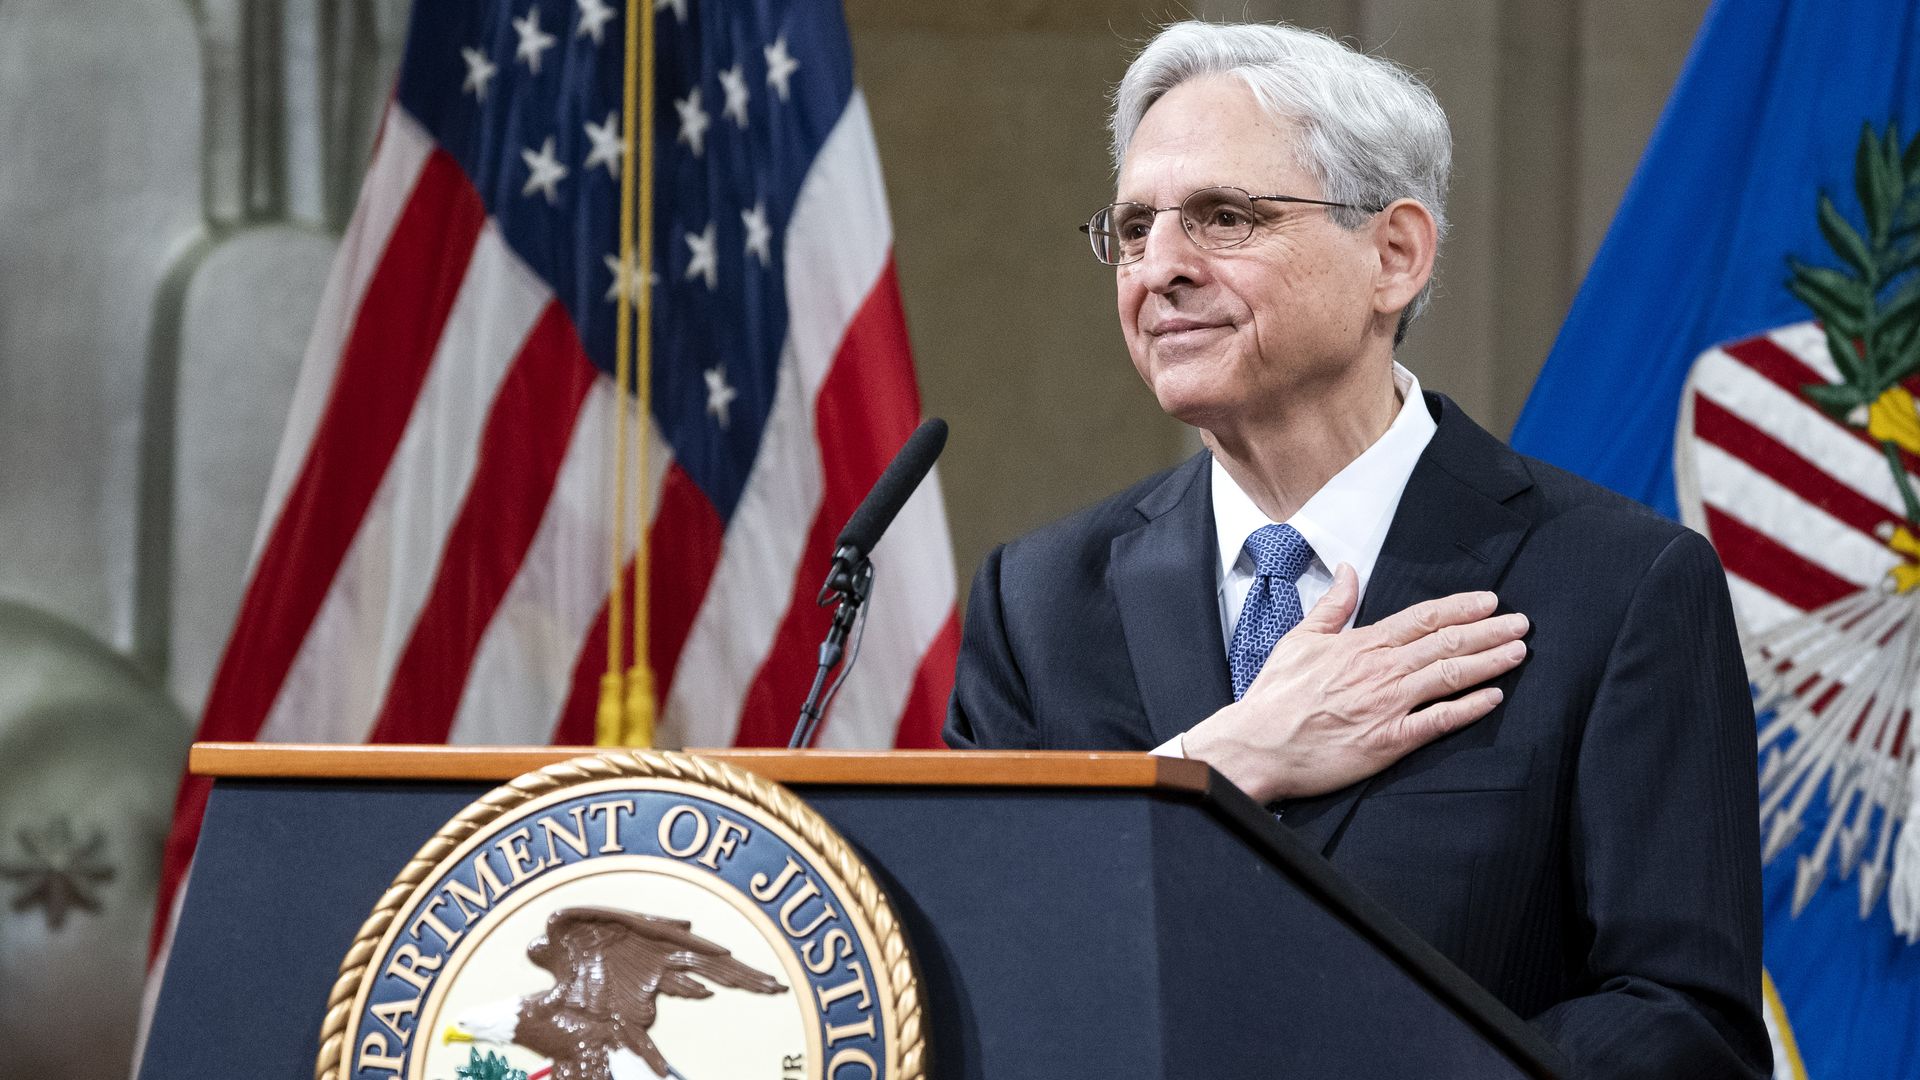 Attorney General Merrick Garland is seen addressing Justice Department employees during his first day in office.